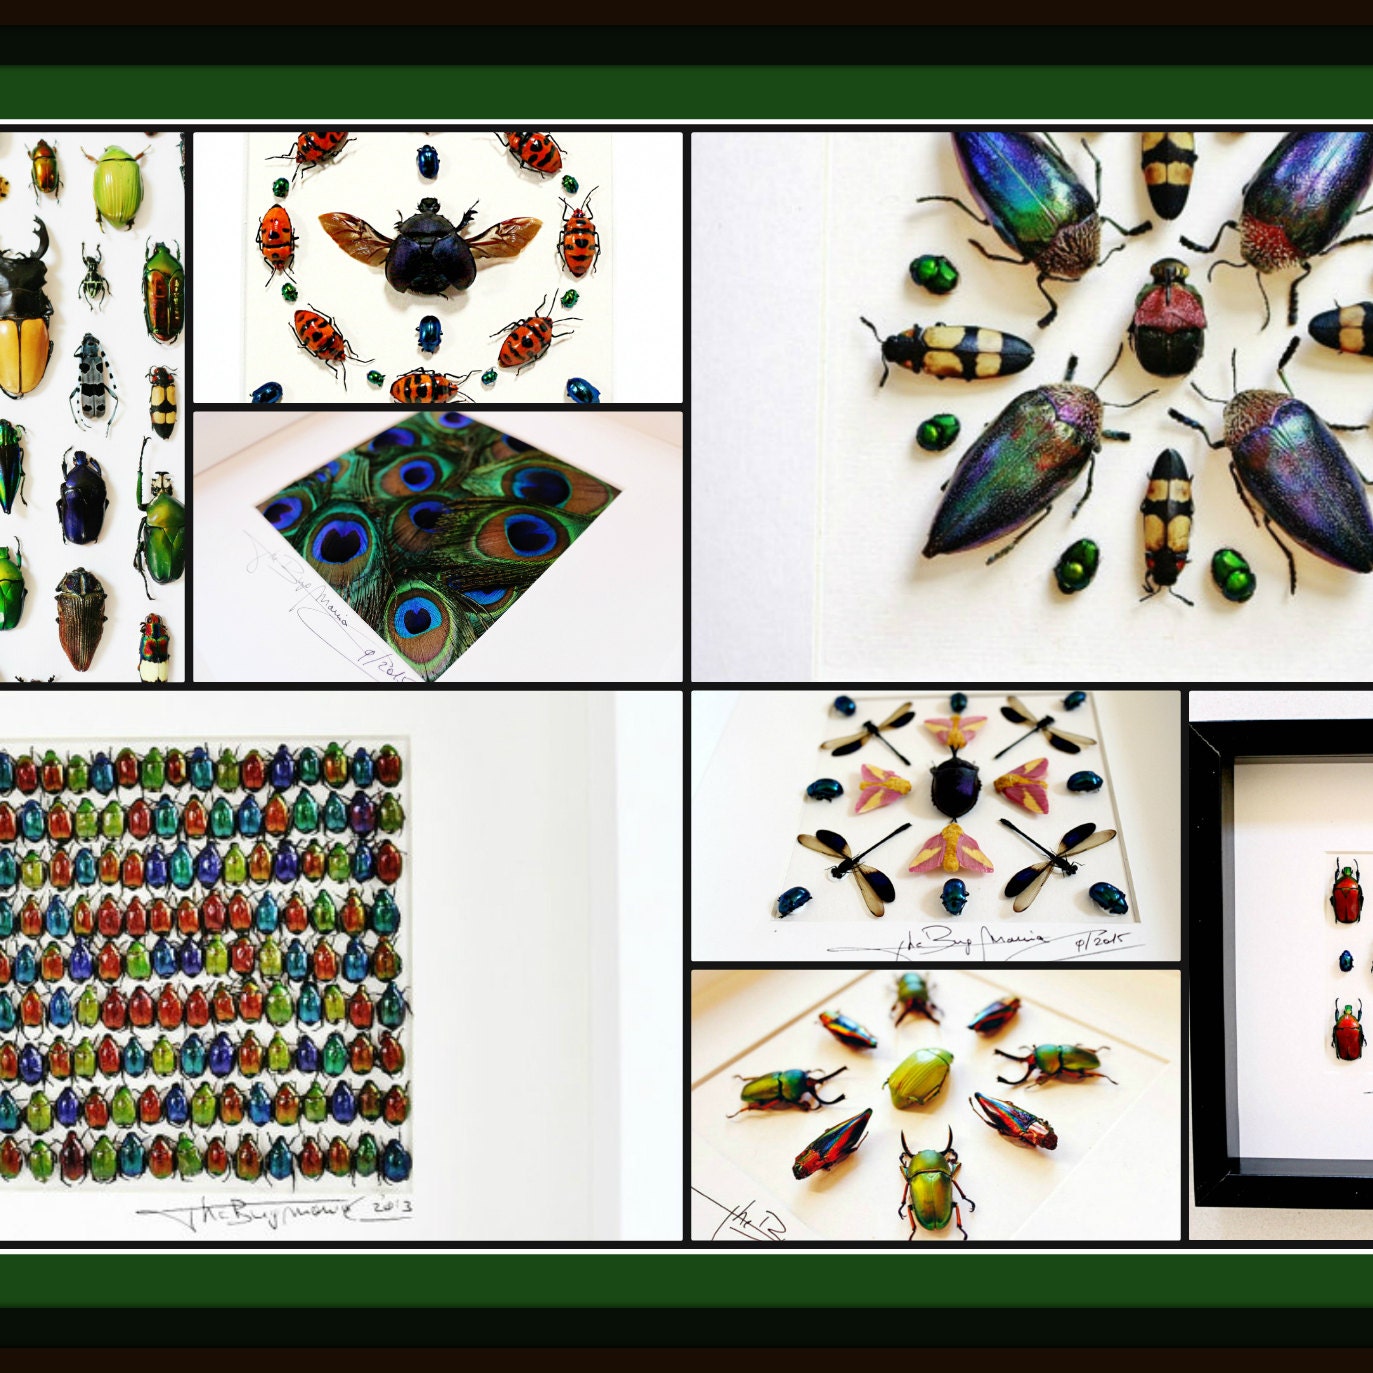 quality, One uncommon papilio antonio with closed wings for all your taxidermy art projects A1 to aa